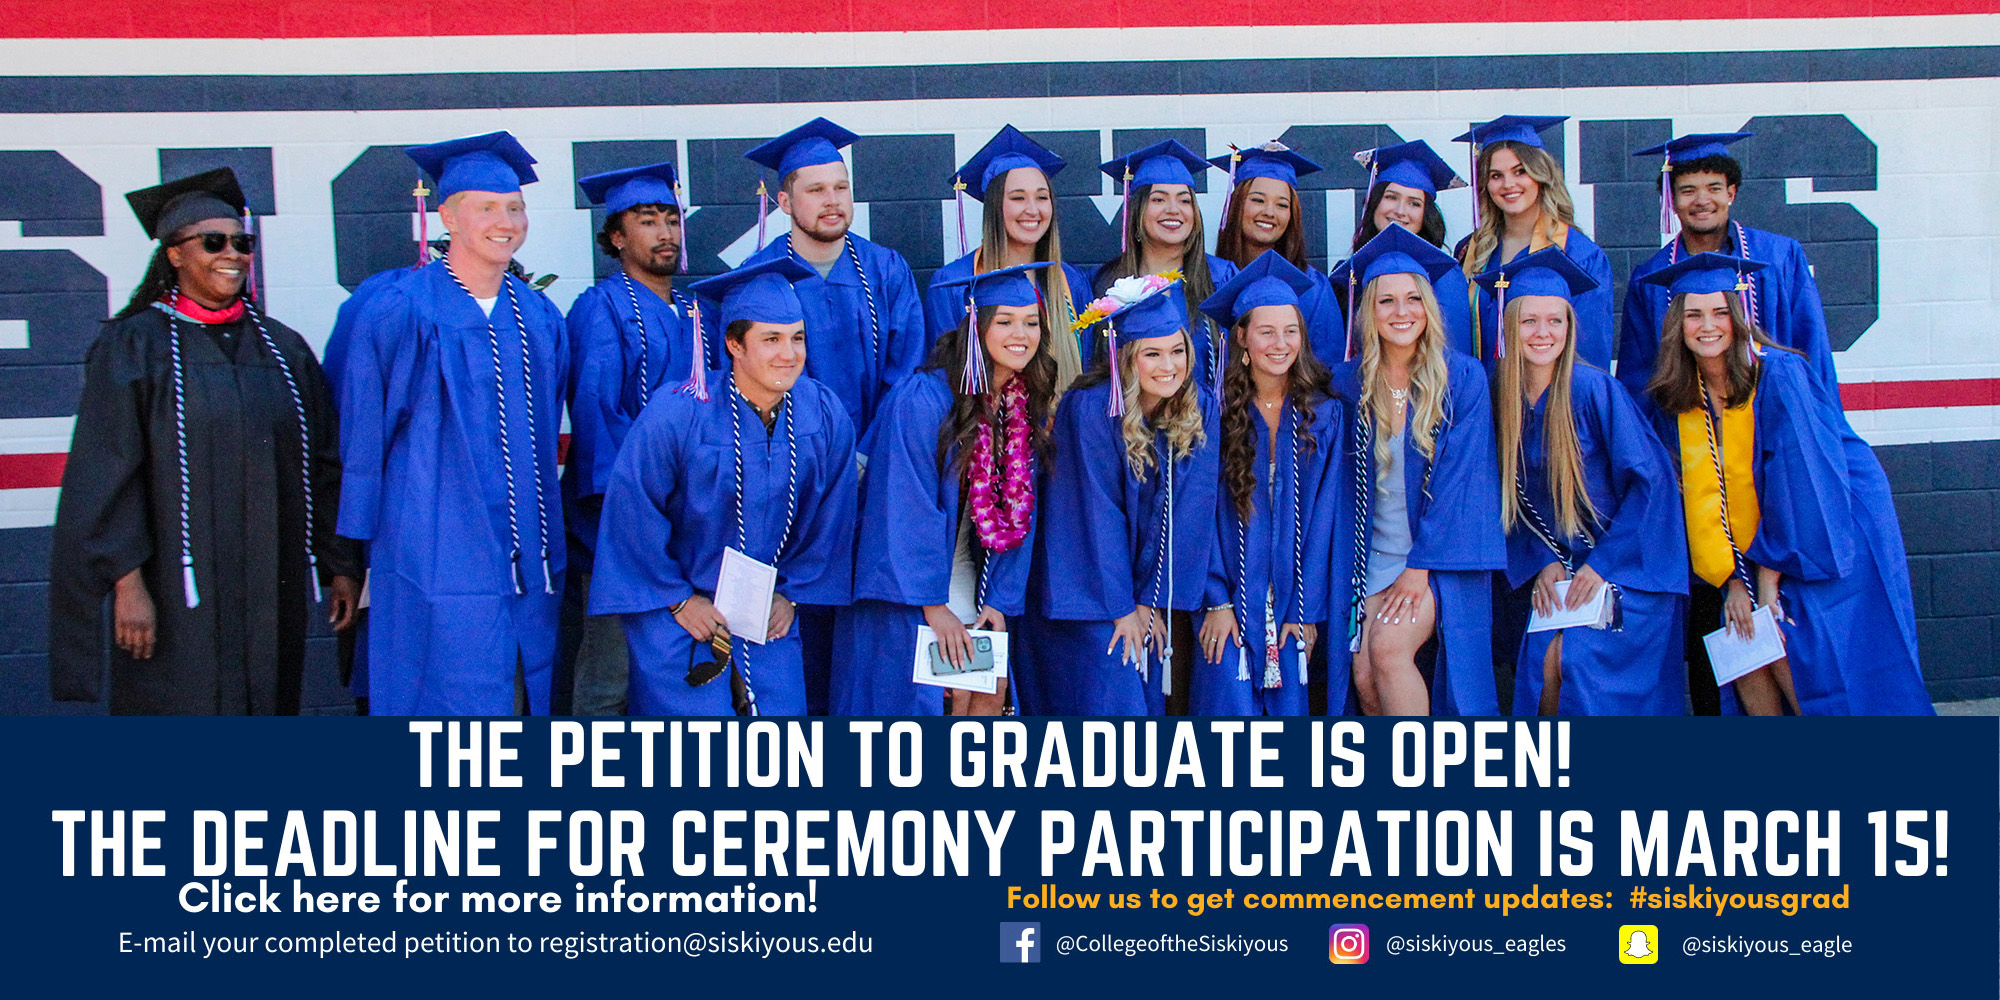 The Petition to Graduate is Open. The Deadline for Ceremony Participation is March 15.